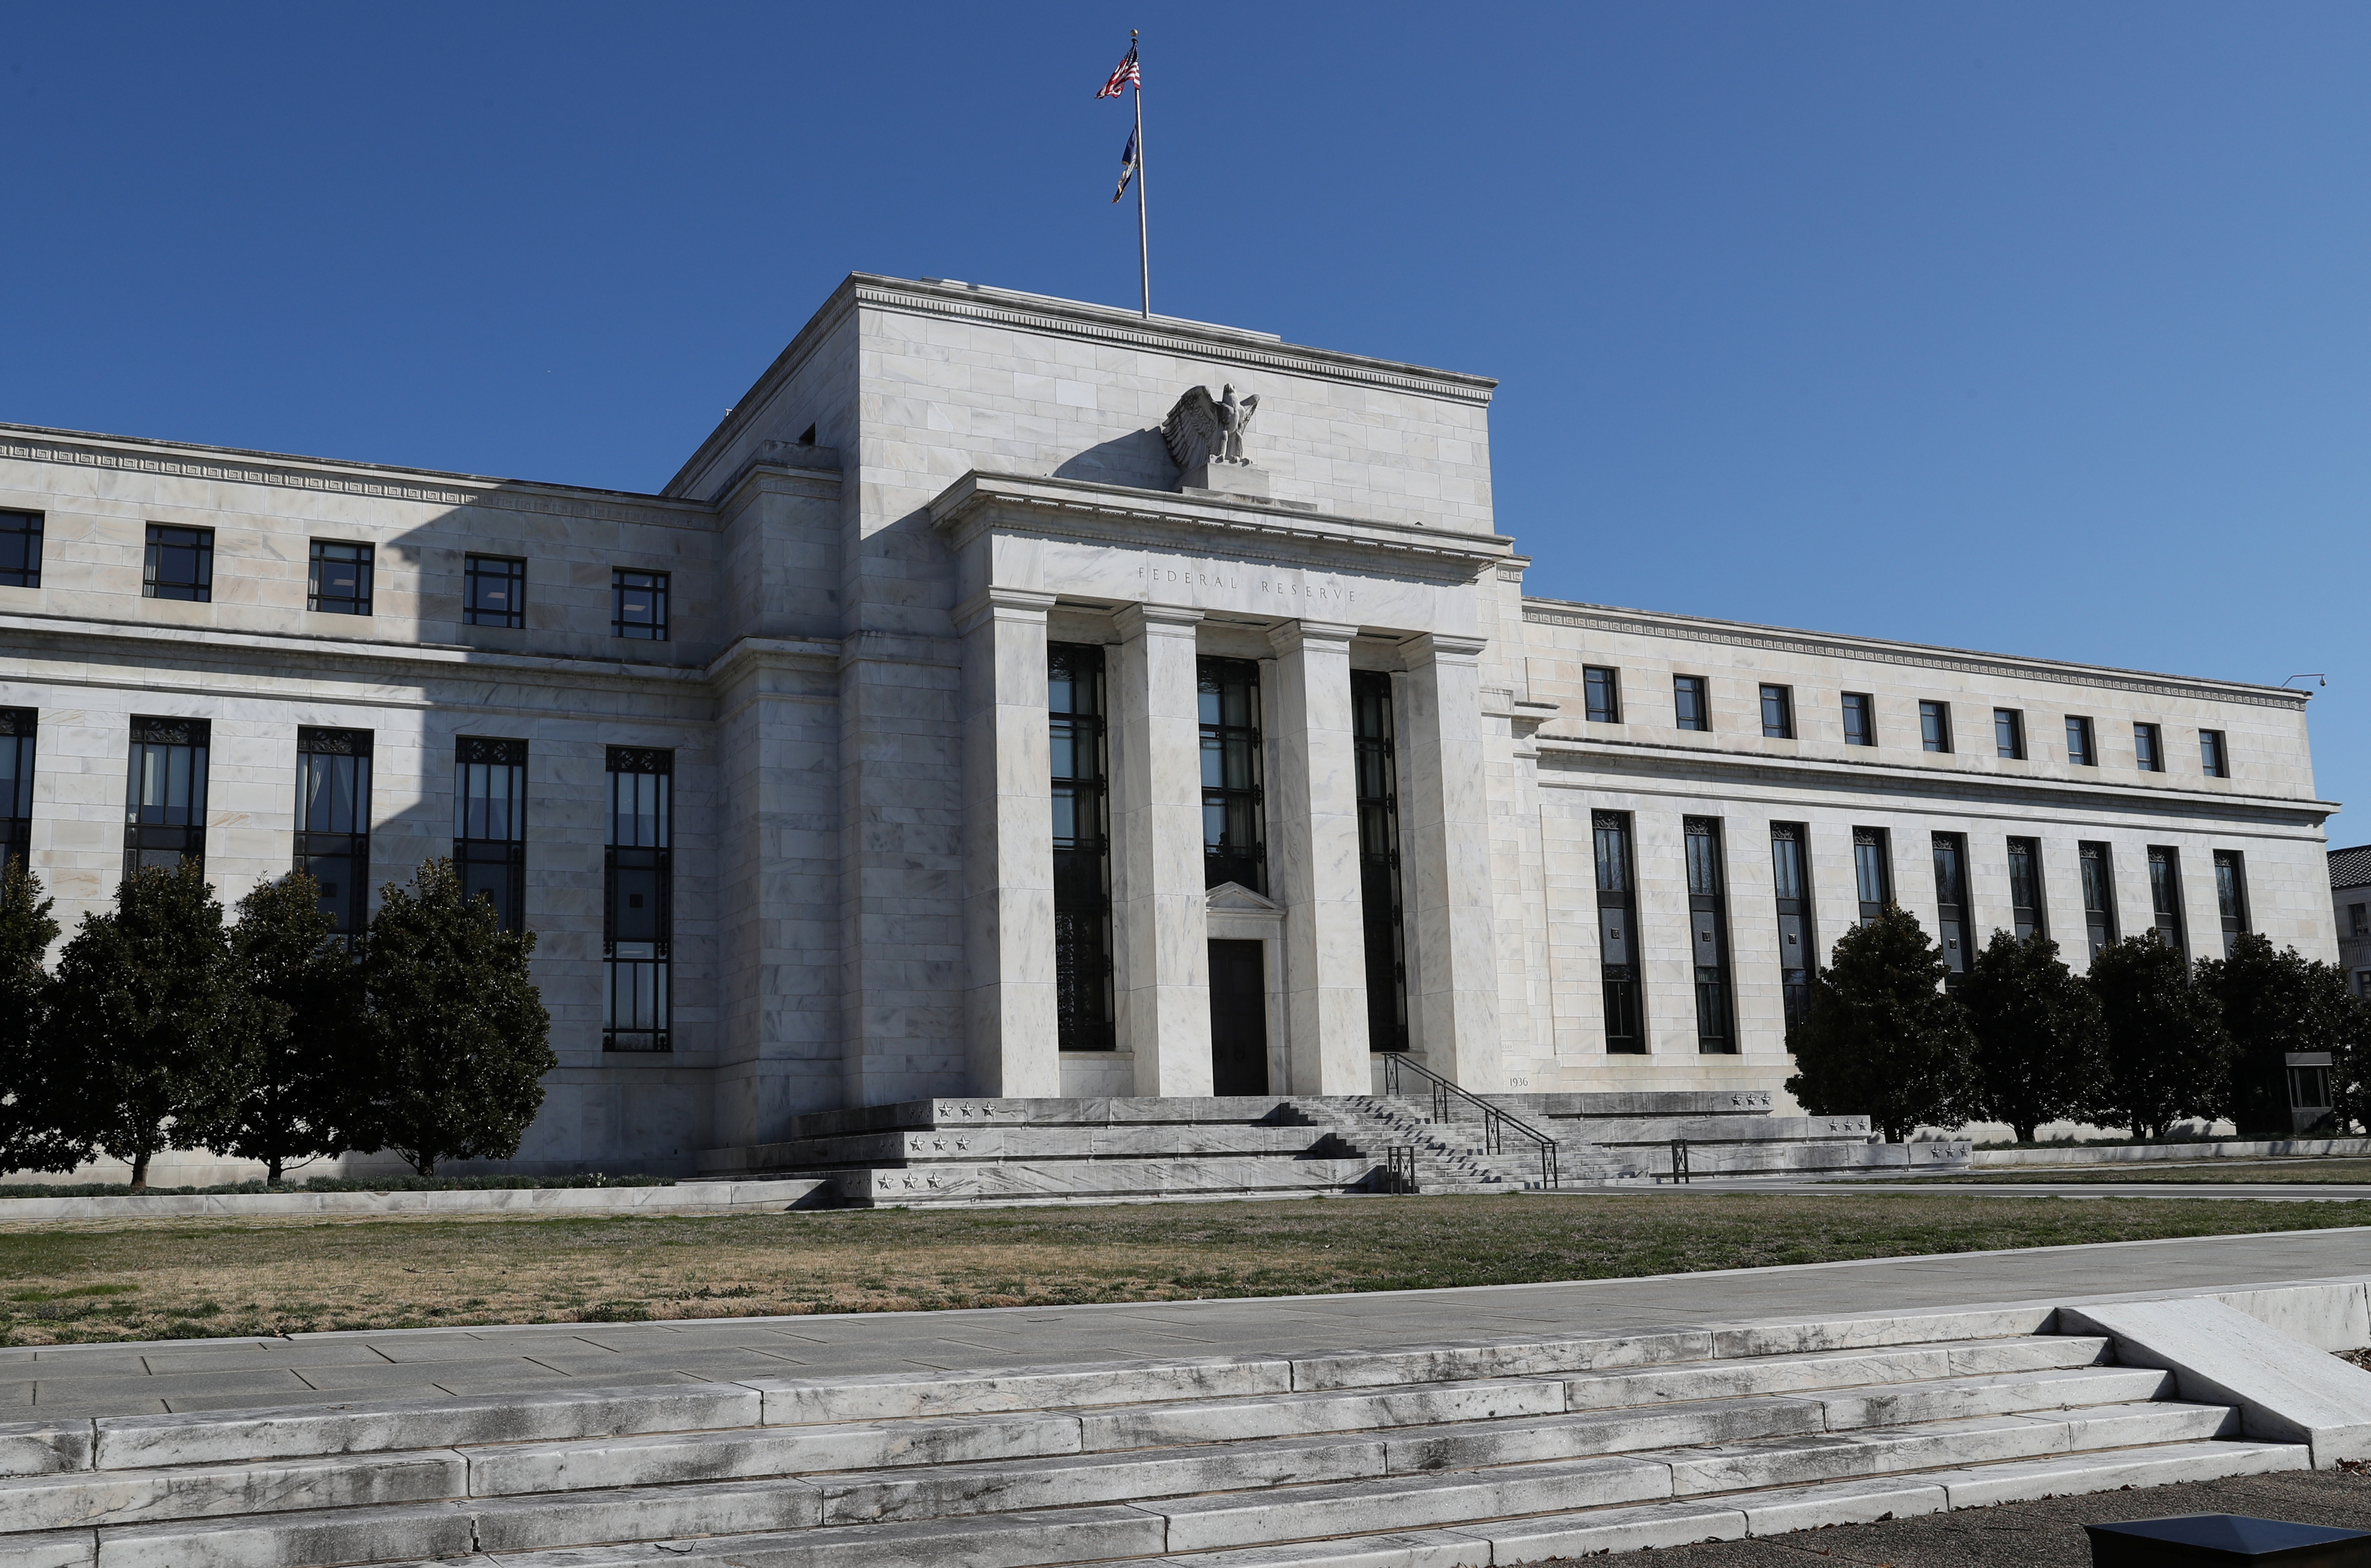 Federal Reserve Board building on Constitution Avenue is pictured in Washington, U.S., March 19, 2019. REUTERS/Leah Millis - RC186FA35920